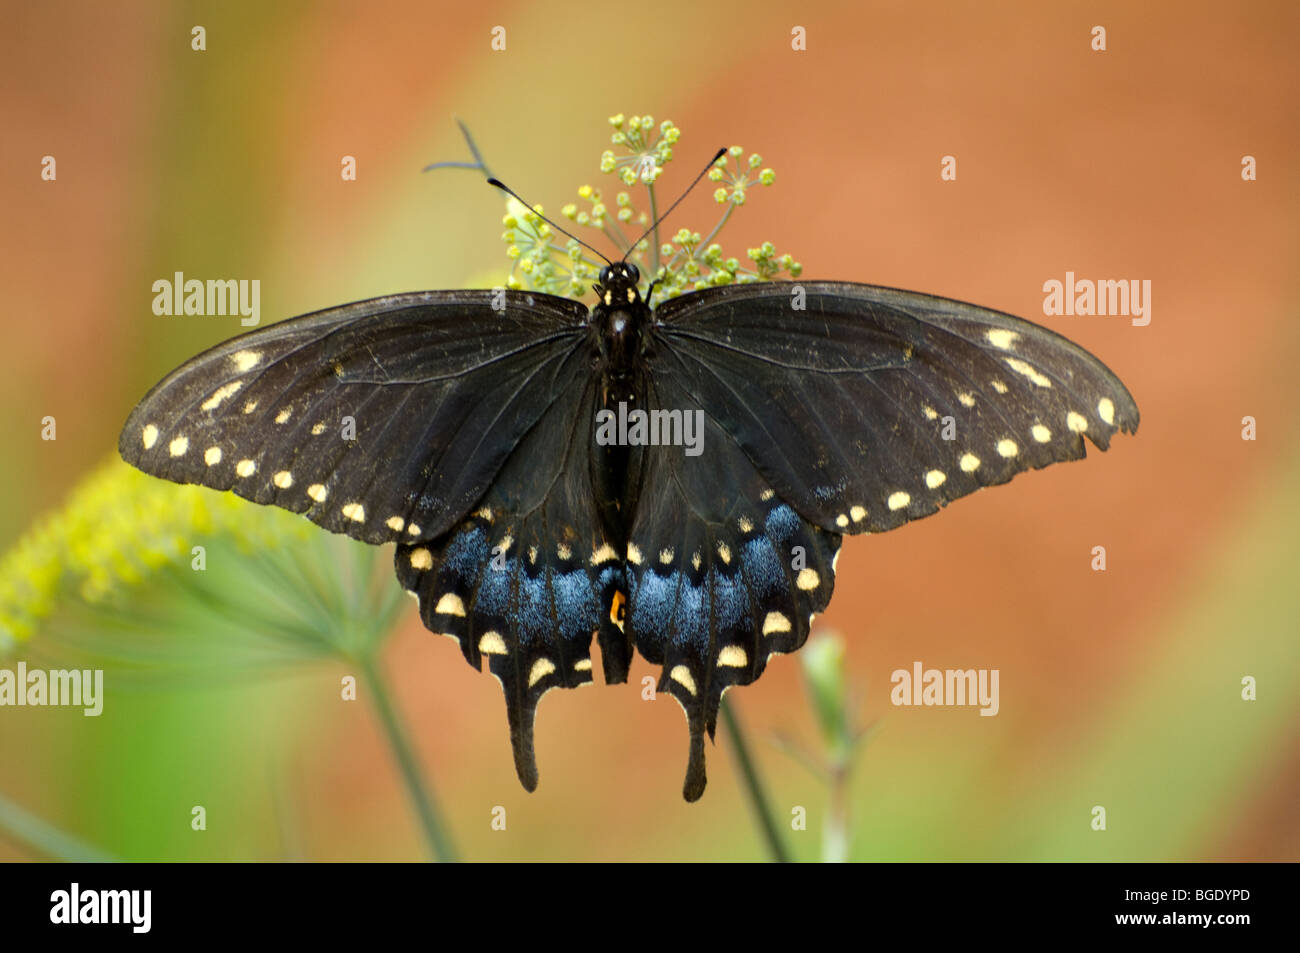 Image of a Black Swallowtail butterfly sitting on a flower sipping nectar Stock Photo